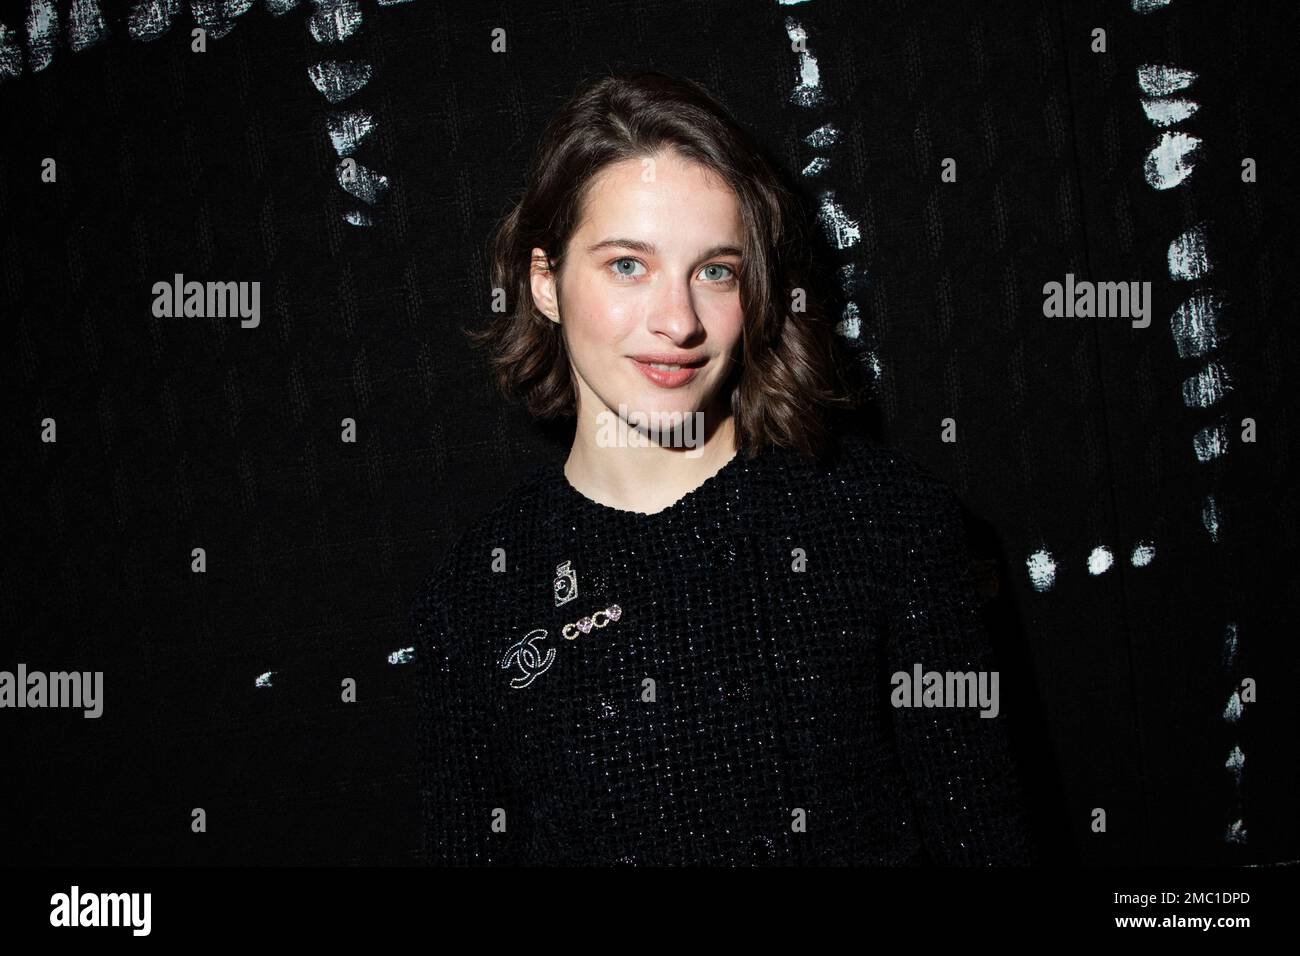 Rebecca Marder Attends The Chanel Ready To Wear Fall Winter Fashion Collection